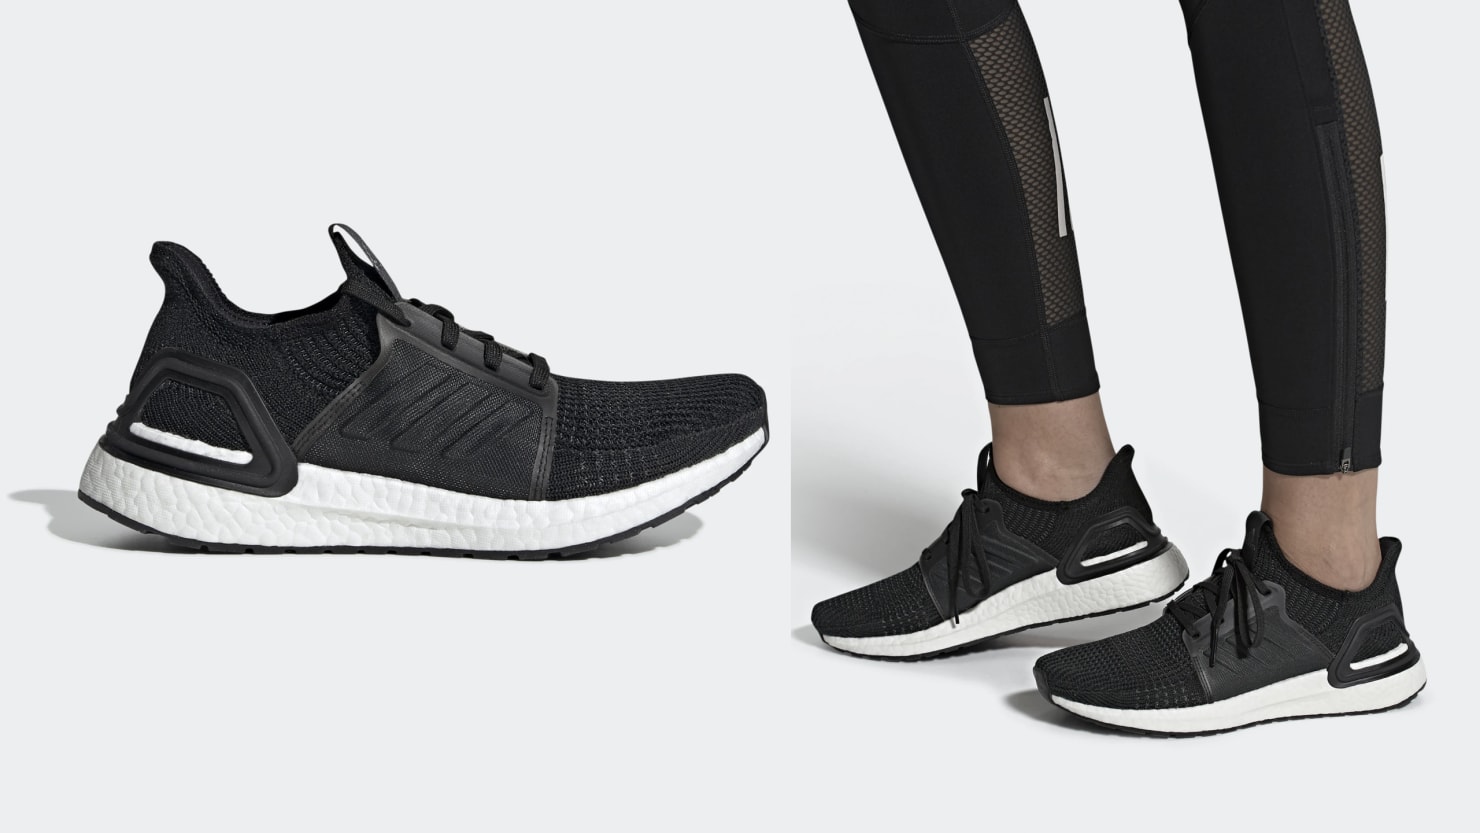 Adidas Ultraboost Sneakers Changed How I Run